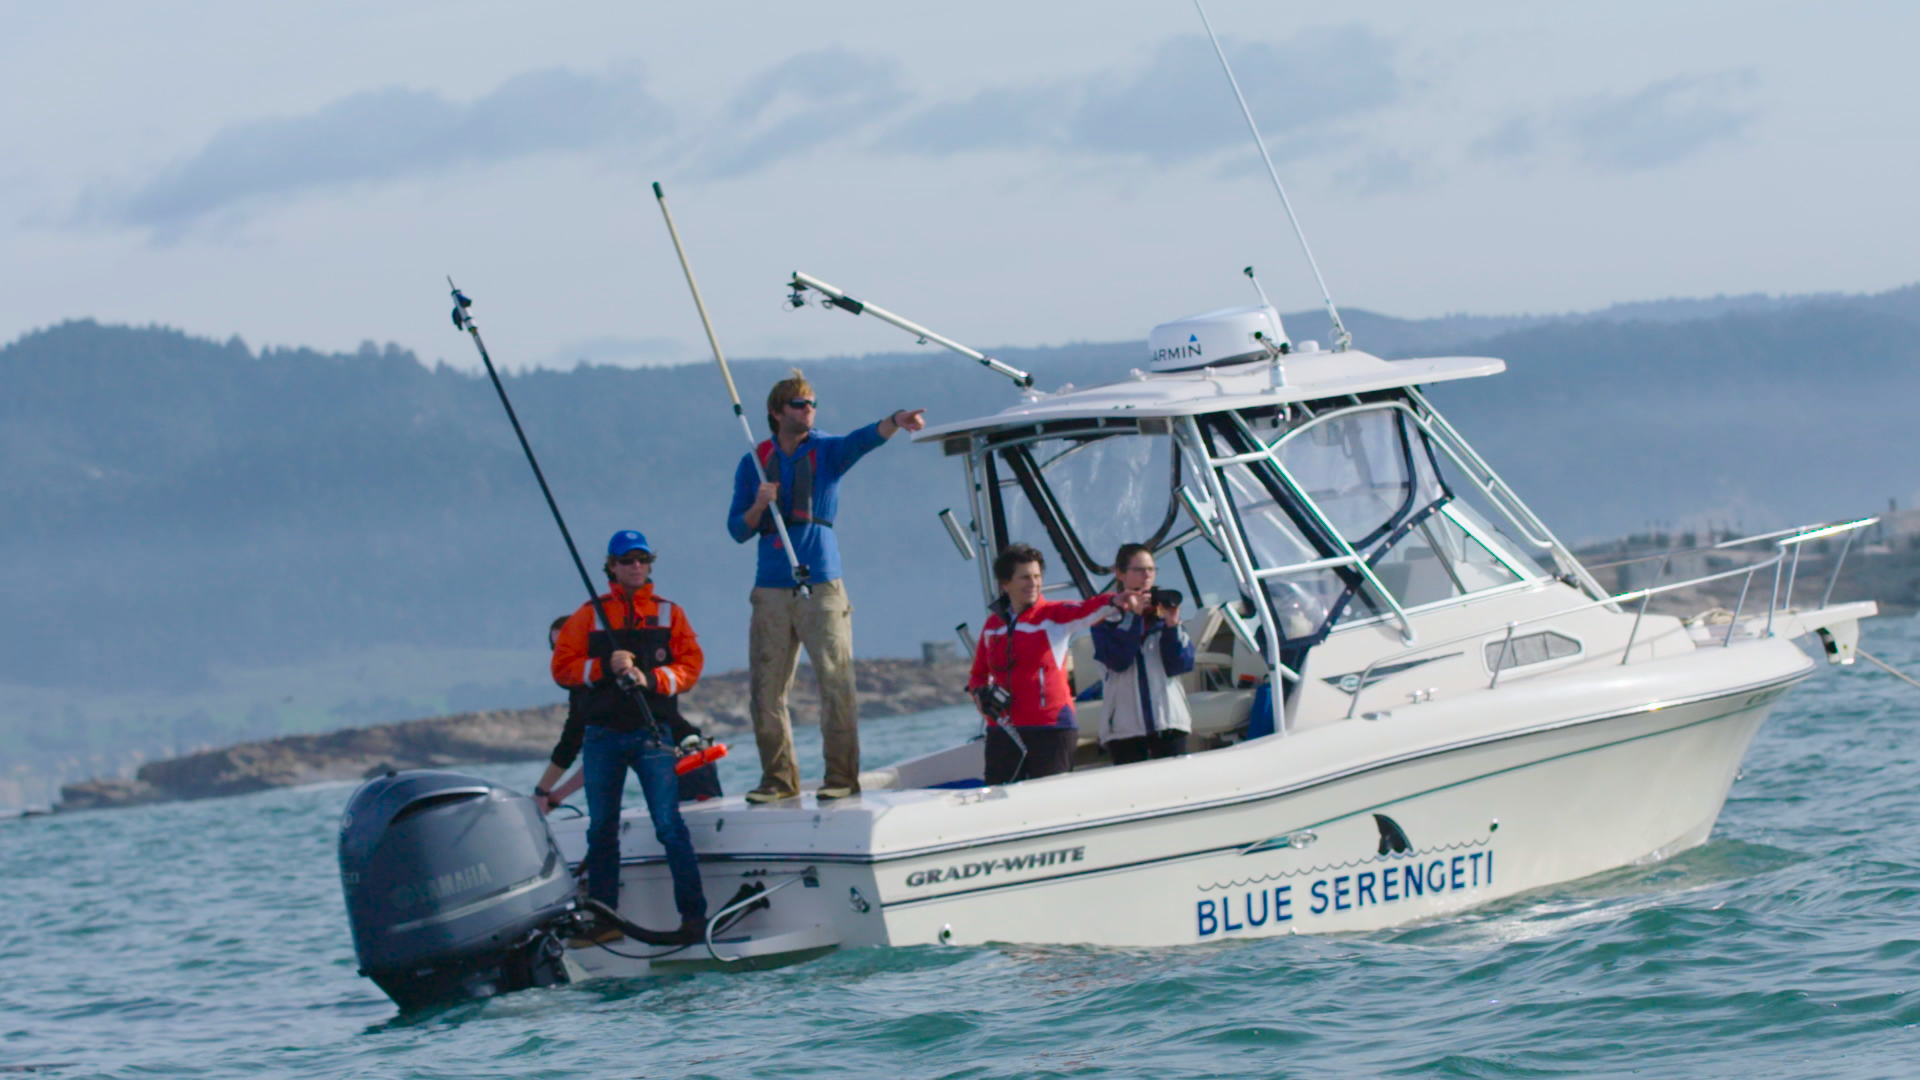 Sal Jorgensen, Taylor Chapple, B. Block and Natalie Arnoldi working to tag a white shark in back of the Stanford research boat Blue Serengeti, inside Ano Nuevo Reserve in California.